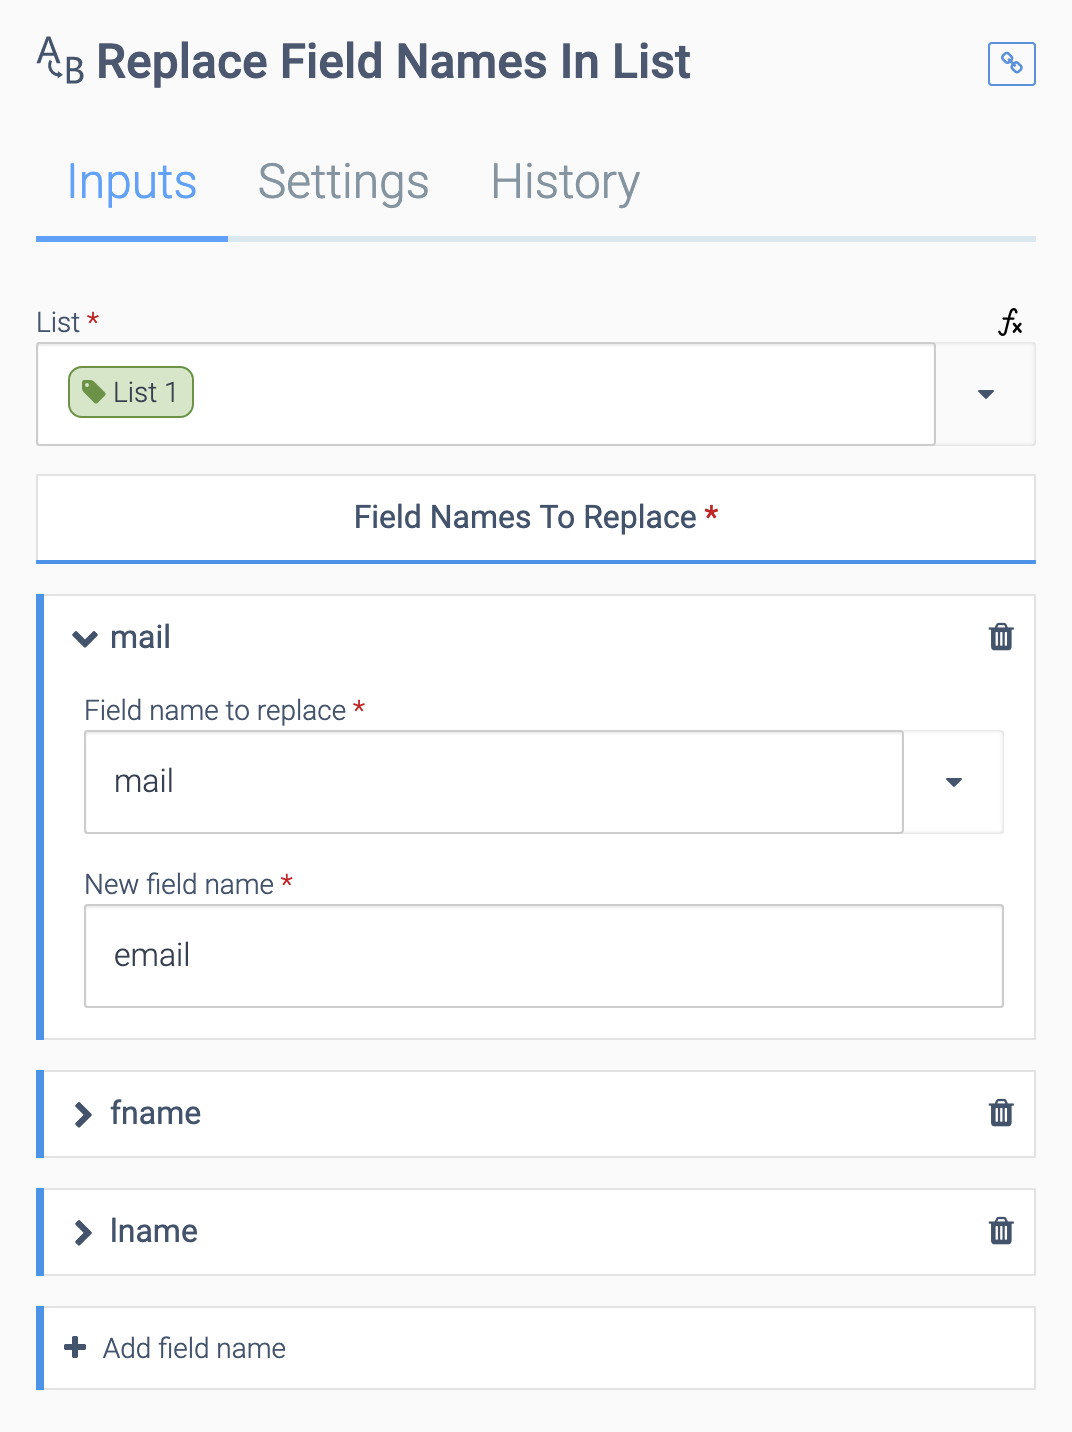 The Inputs tab of the Replace Field Names In List block. There is a Field Names To Replace dropdown for each field name in the attached list. In the top dropdown, Field name to replace is set to mail, and New field name is set to email.